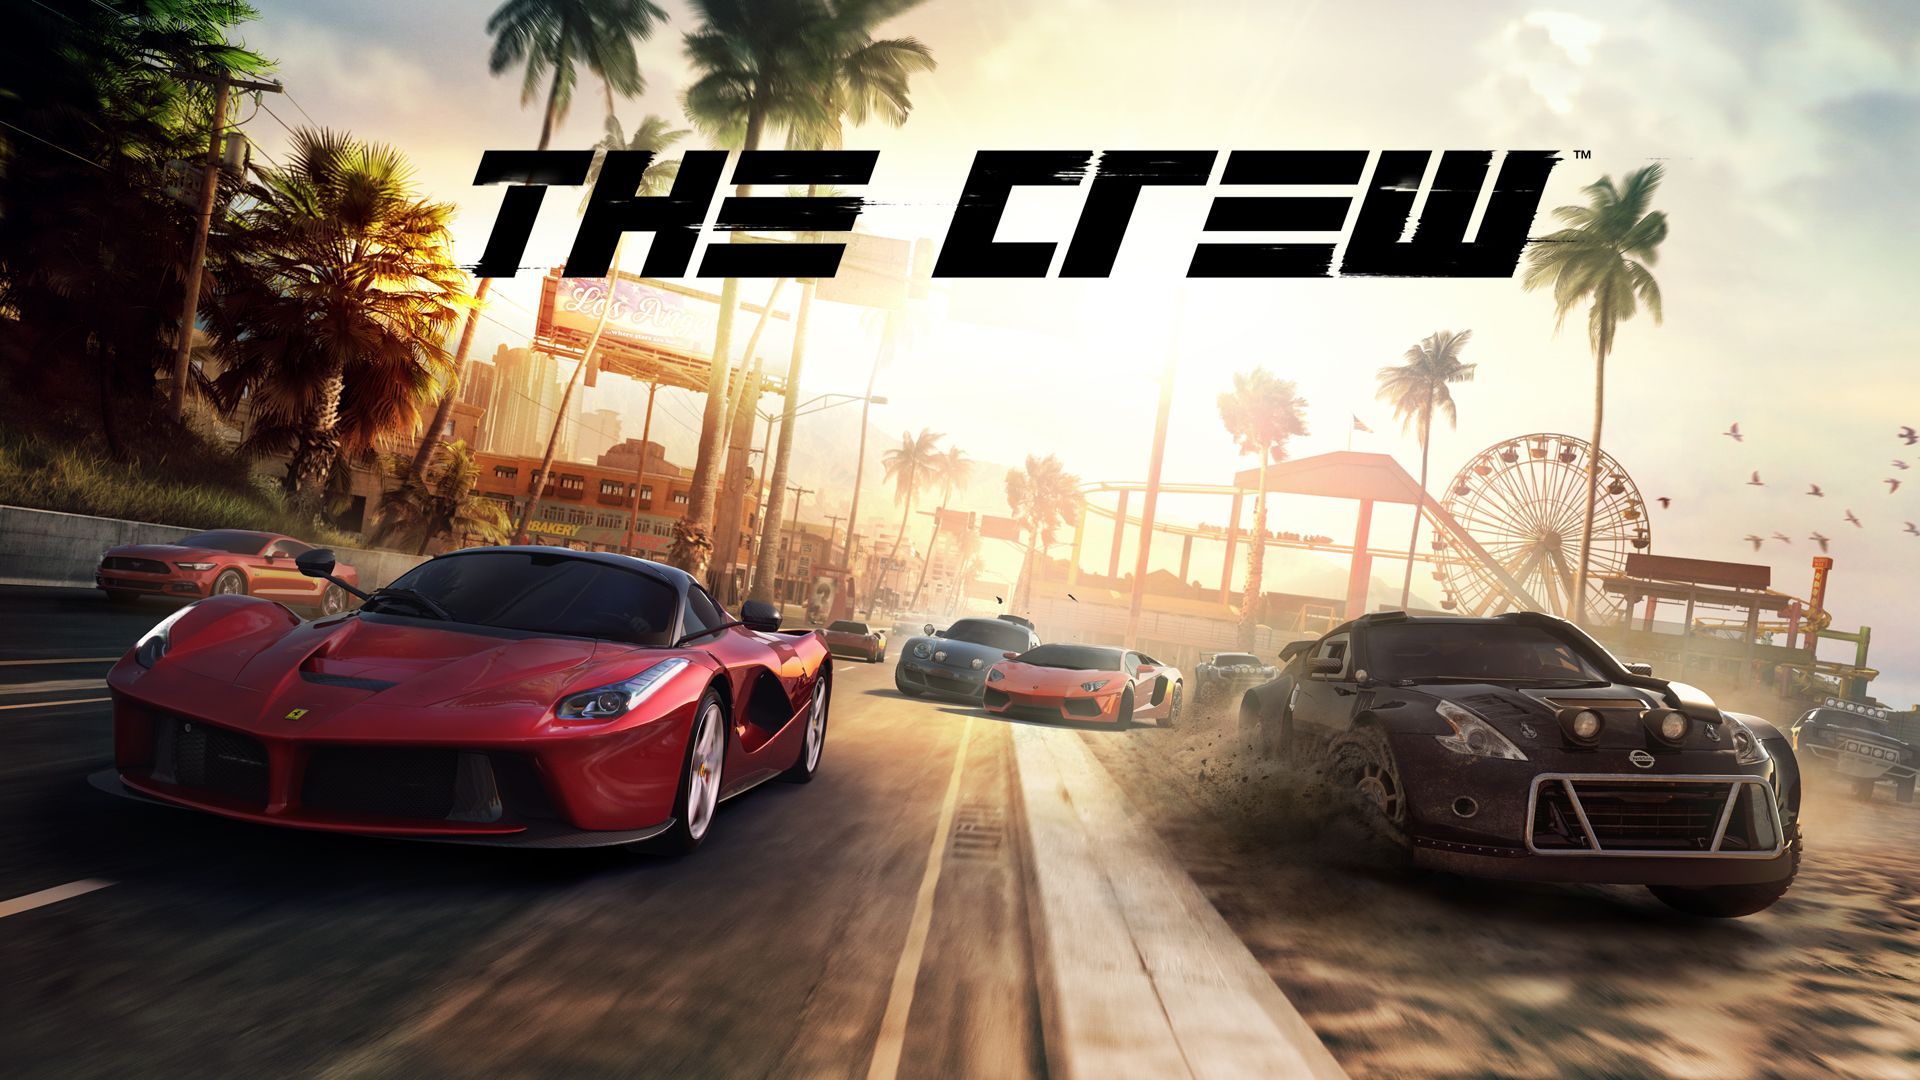 Ubisoft's free game for September is 'The Crew'